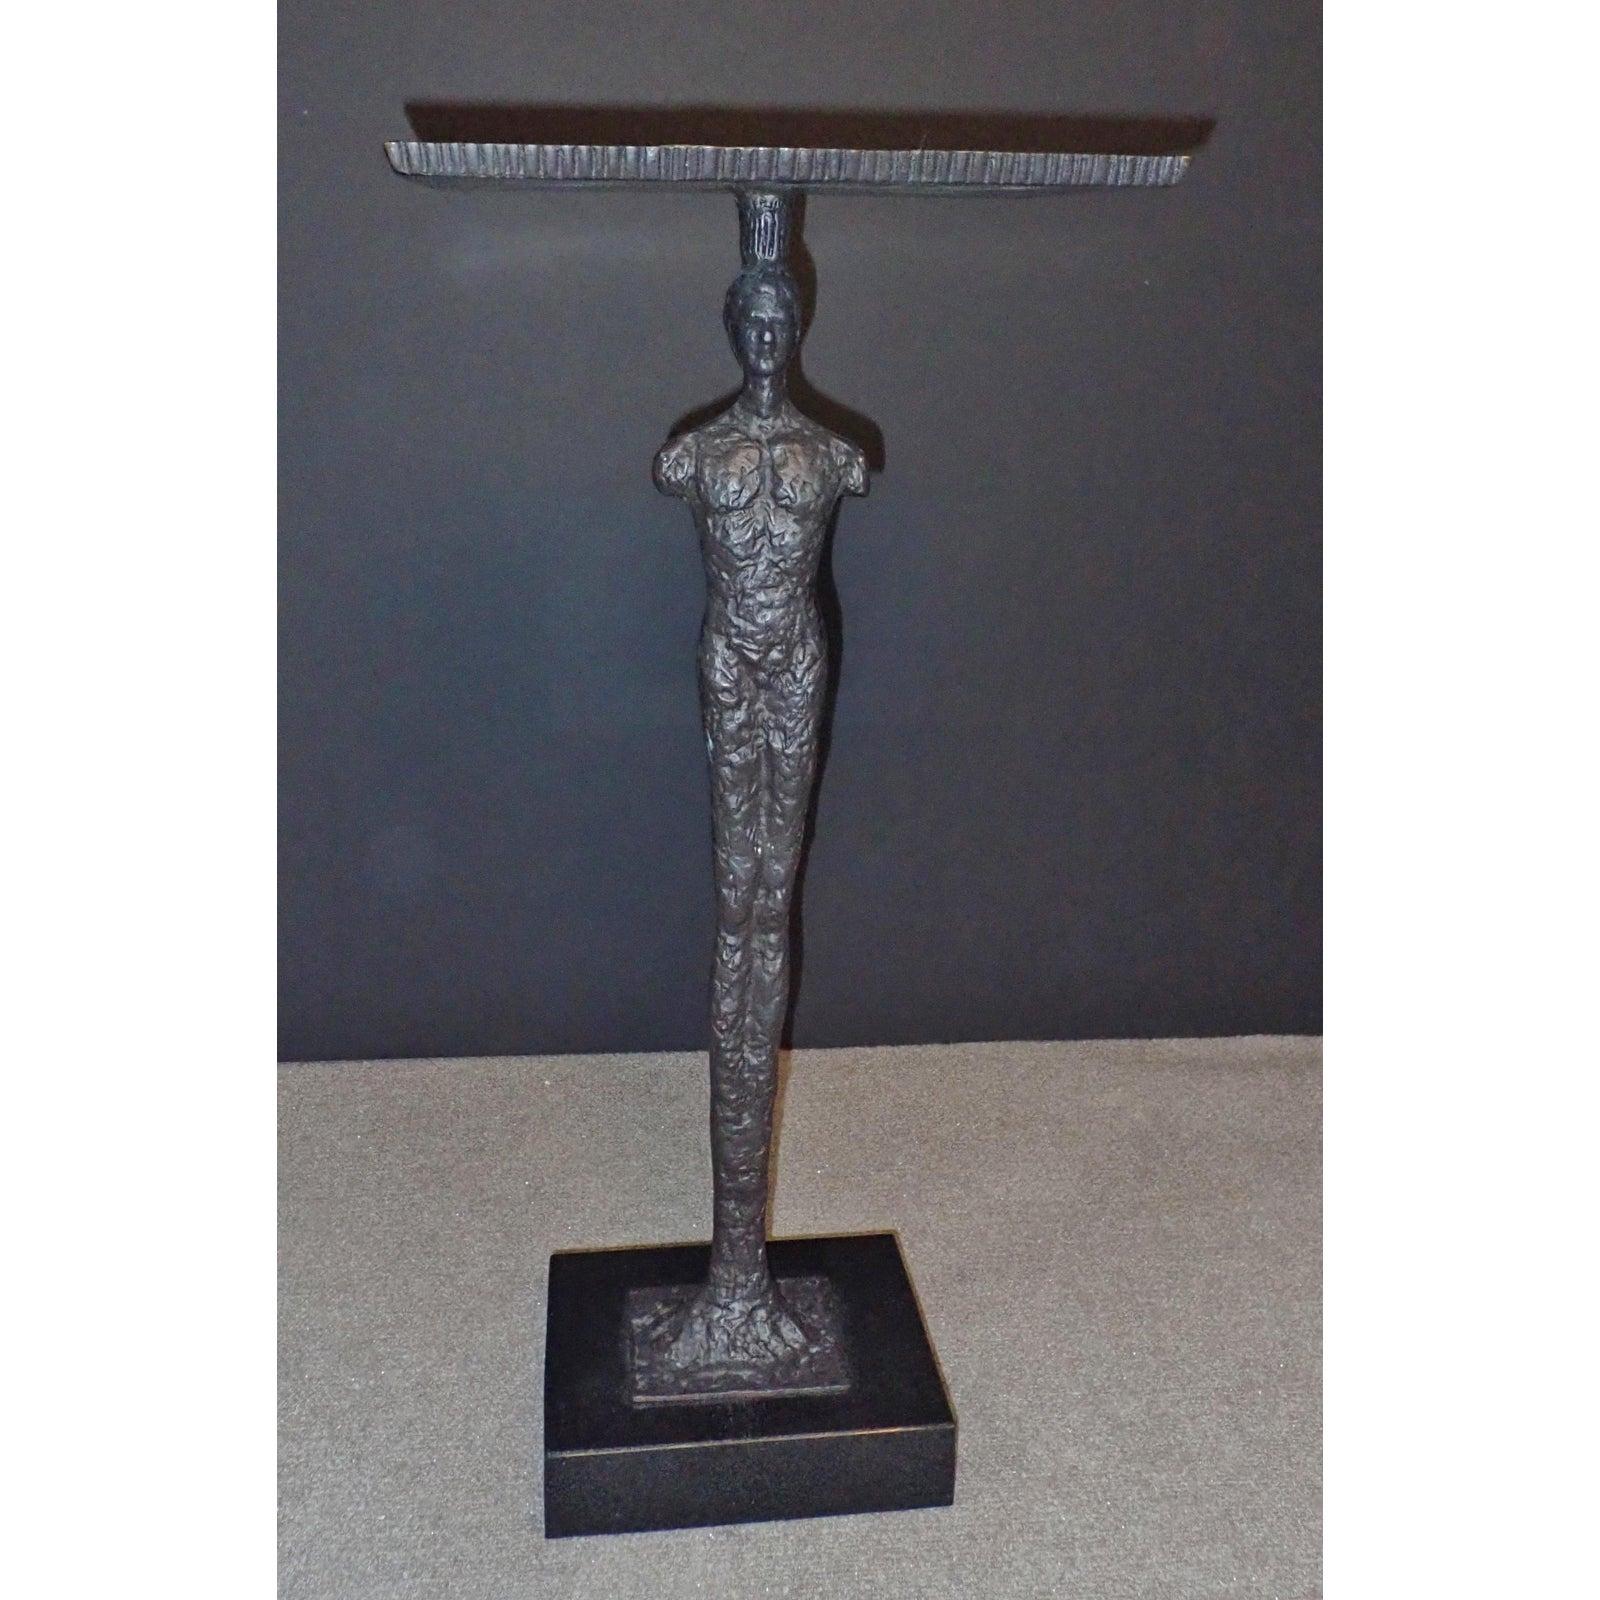 Giacometti style bronze figurative side table. Side table guéridon in the manor of Giacometti. Bronze mounted on granite or marble base.